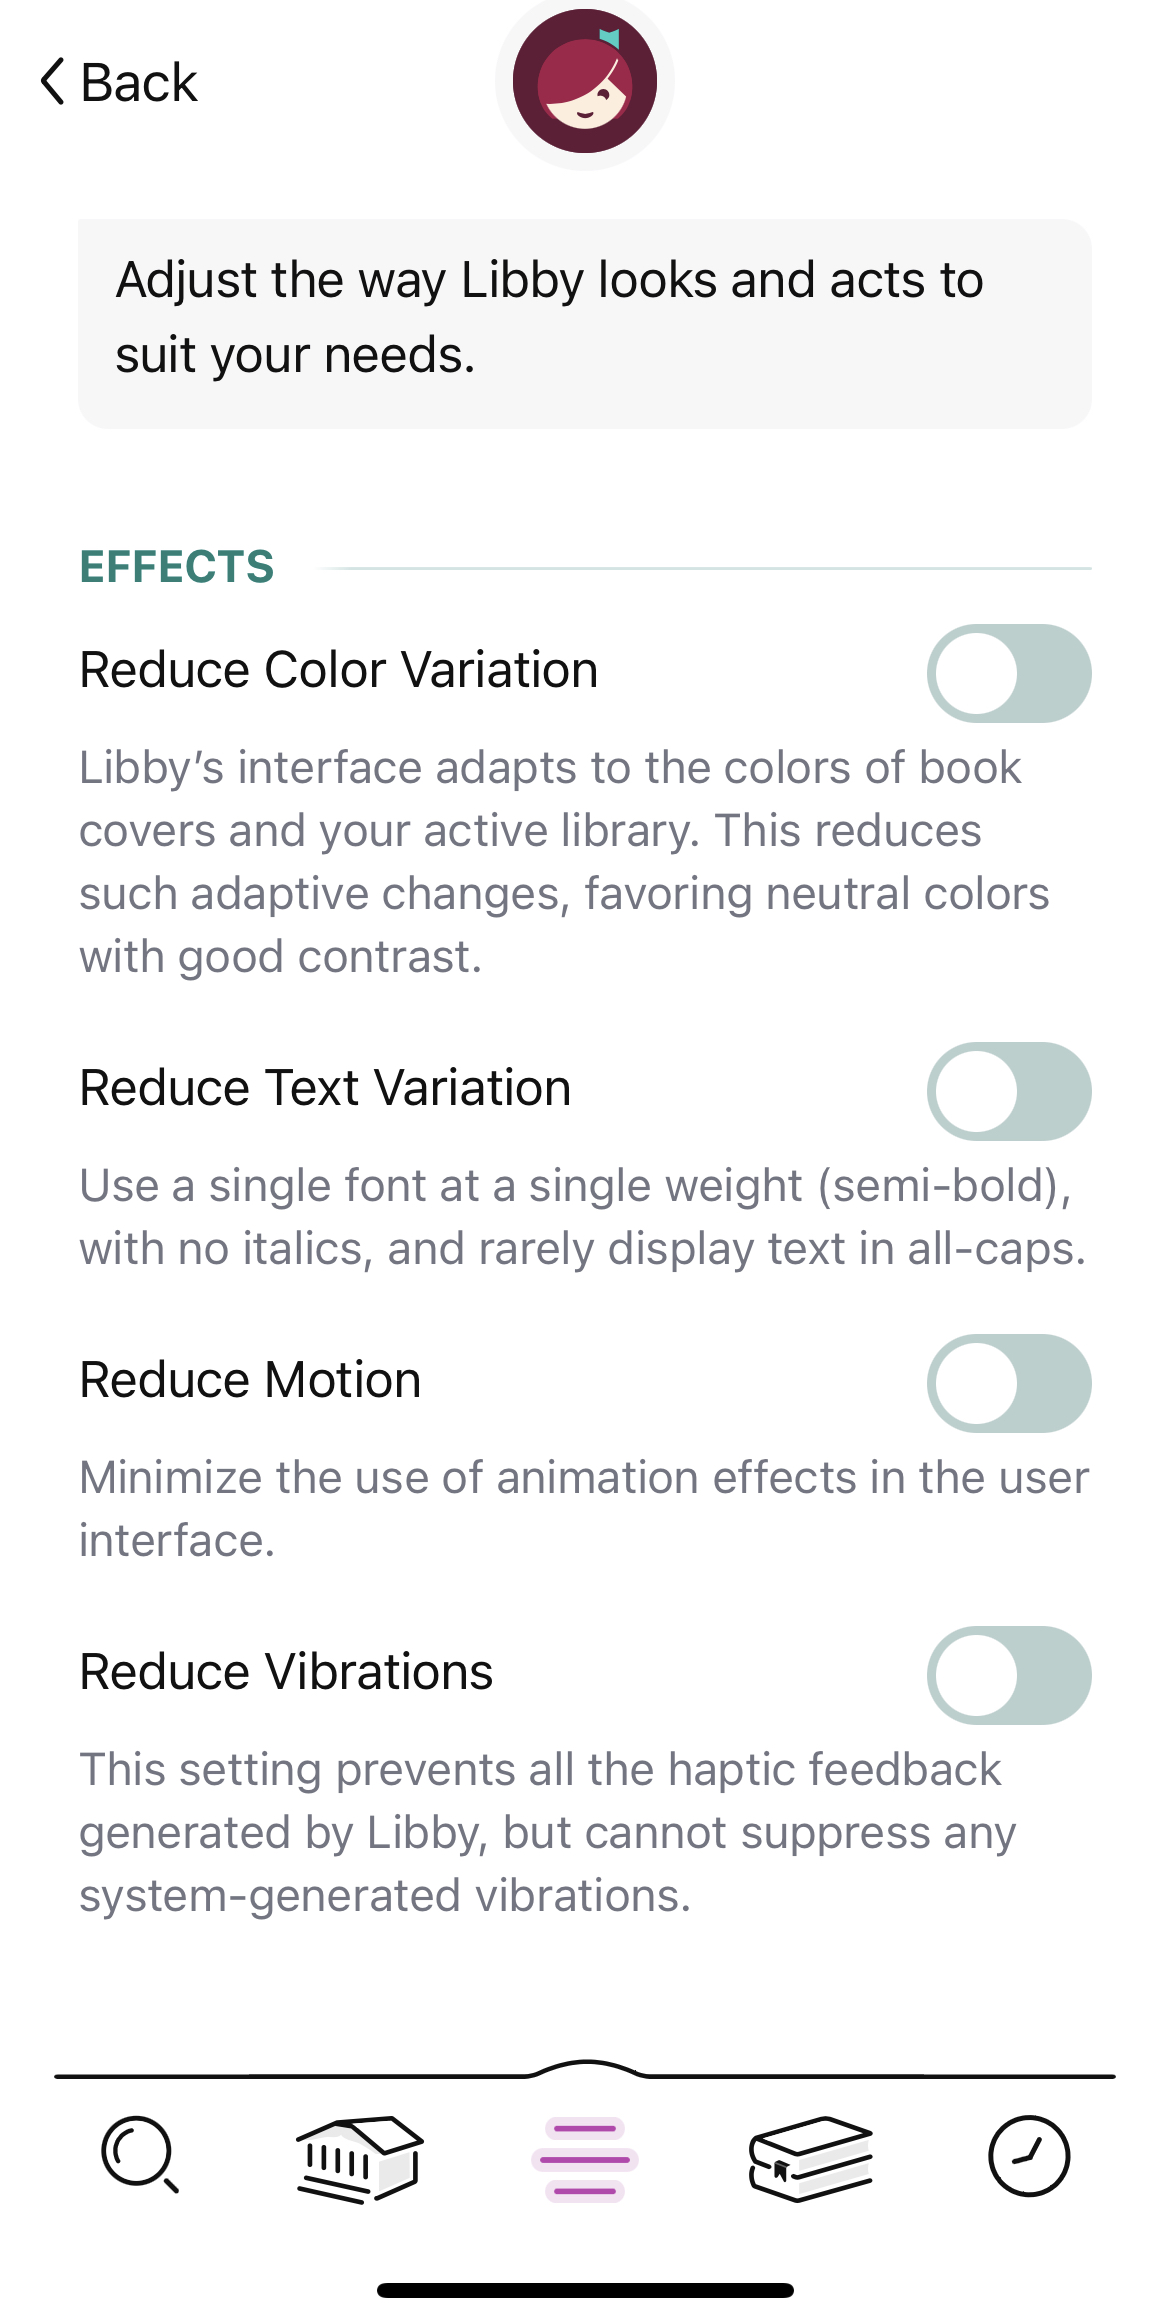 Libby by OverDrive Accessibility Settings menu